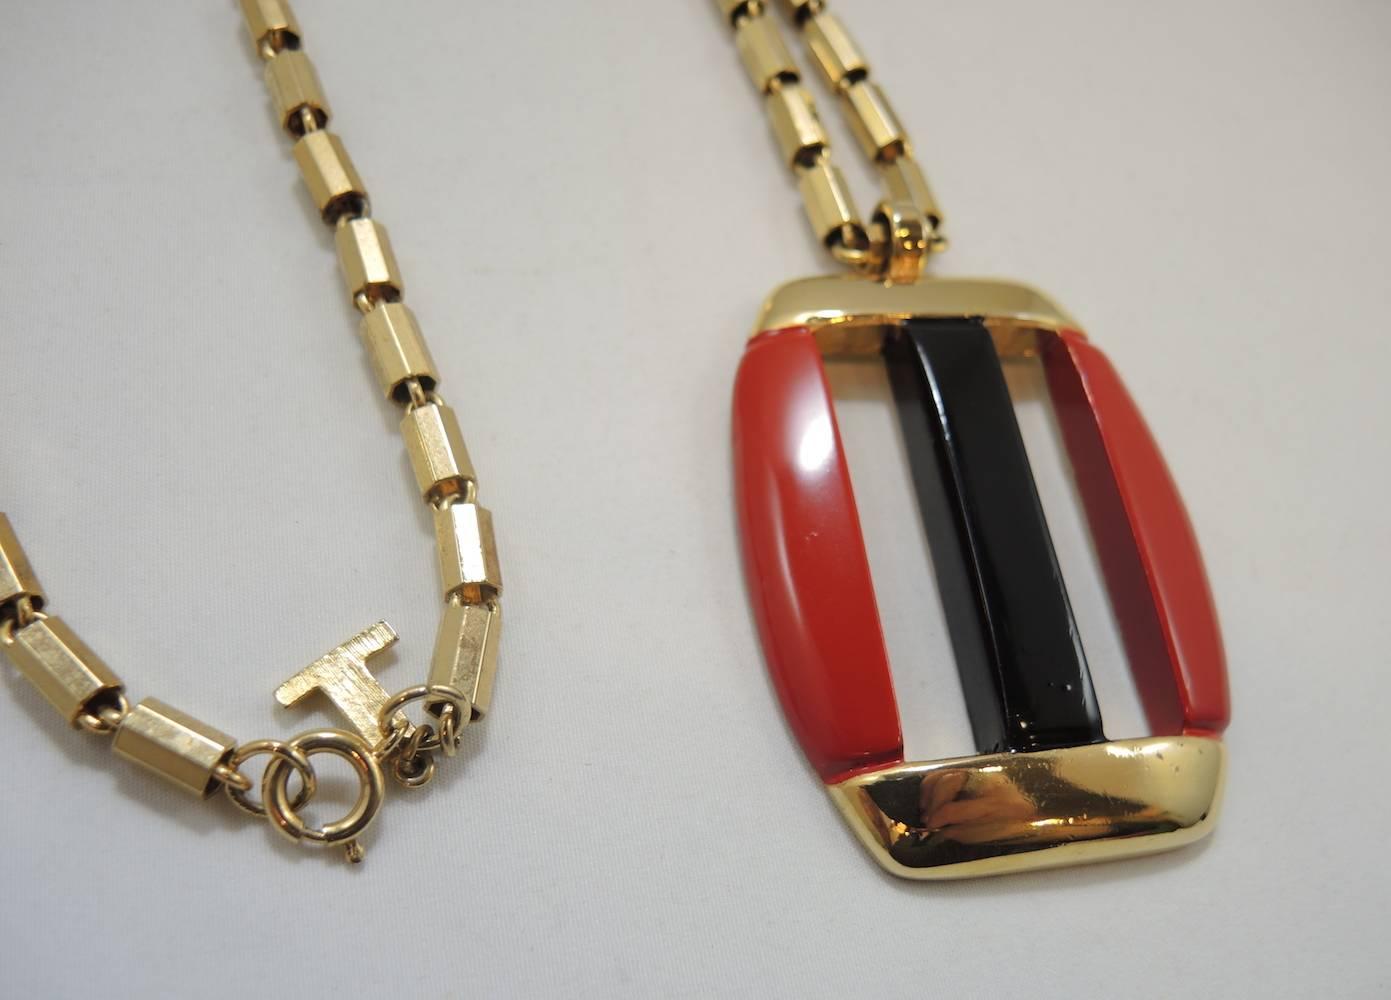 This is a classic Lanvin Of Paris large pendant necklace. It has a rectangular shaped pendant with an abstract design. There is red and black enamel with two openings in the center. It has the Lanvin’s famous link chain and is made in a gold tone